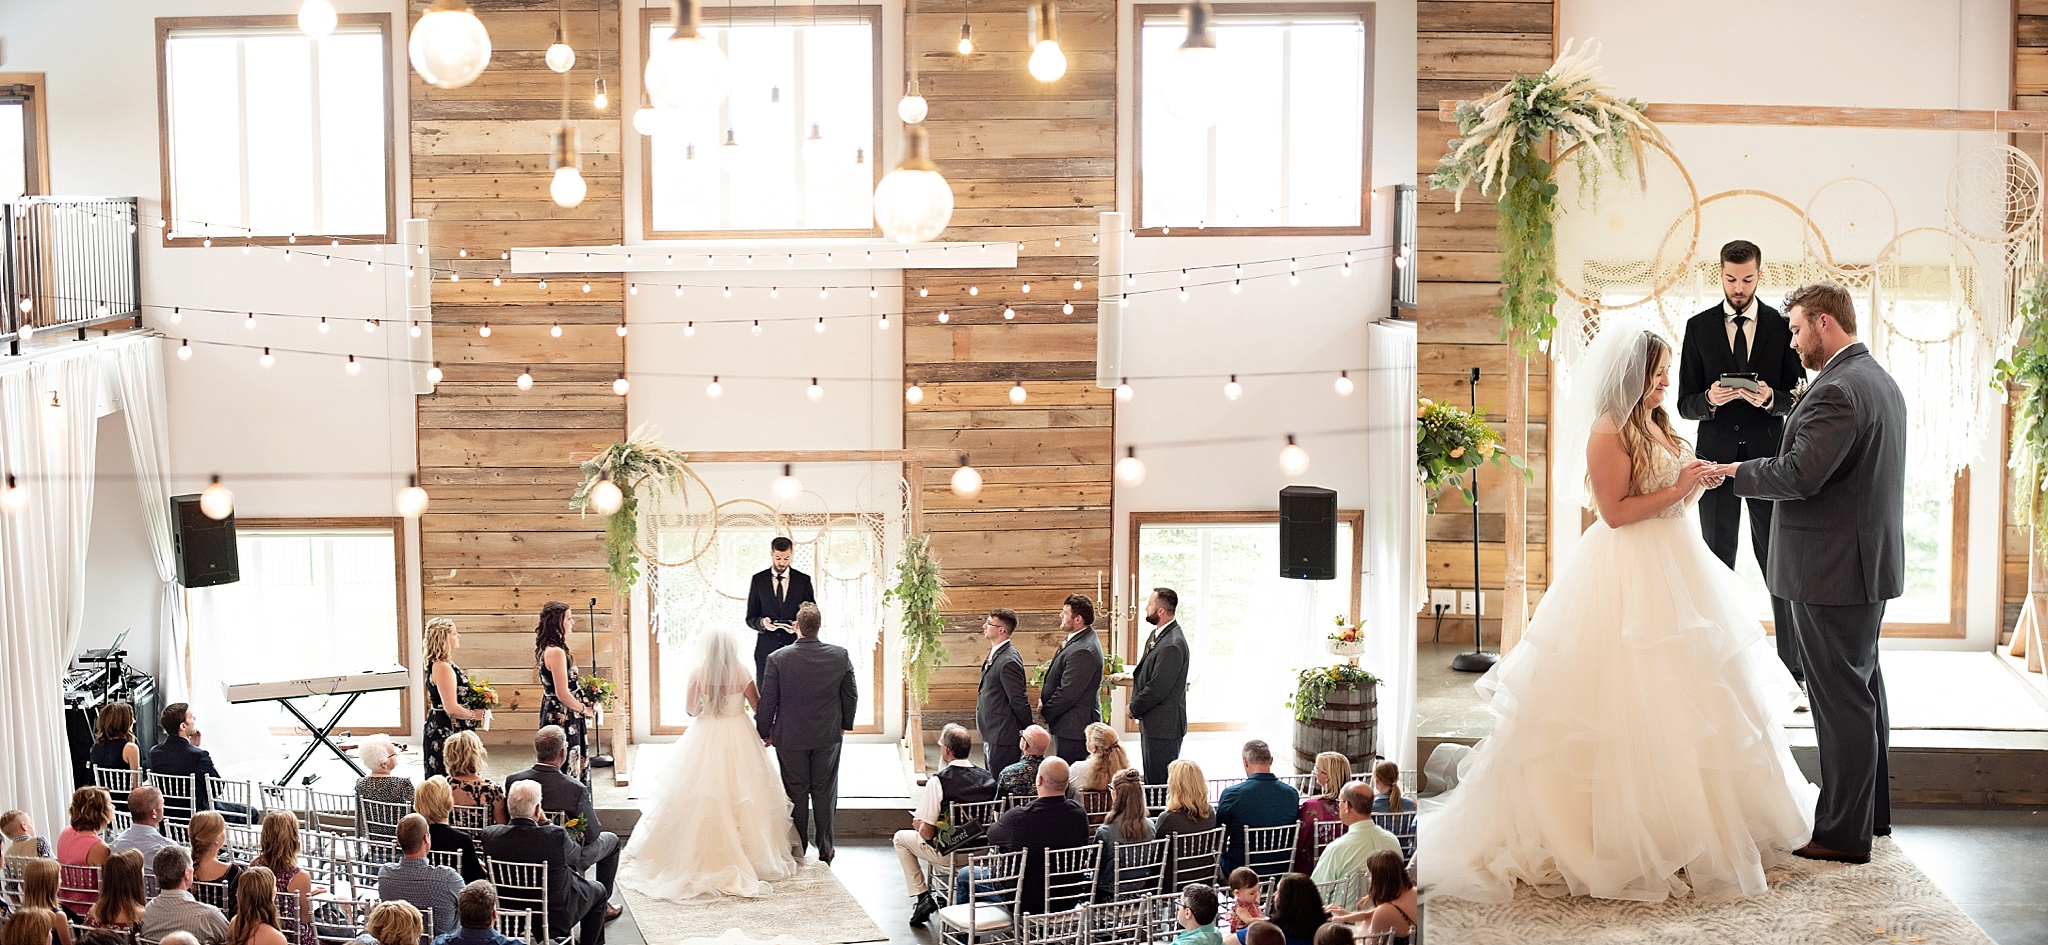 ceremony at blue haven barn